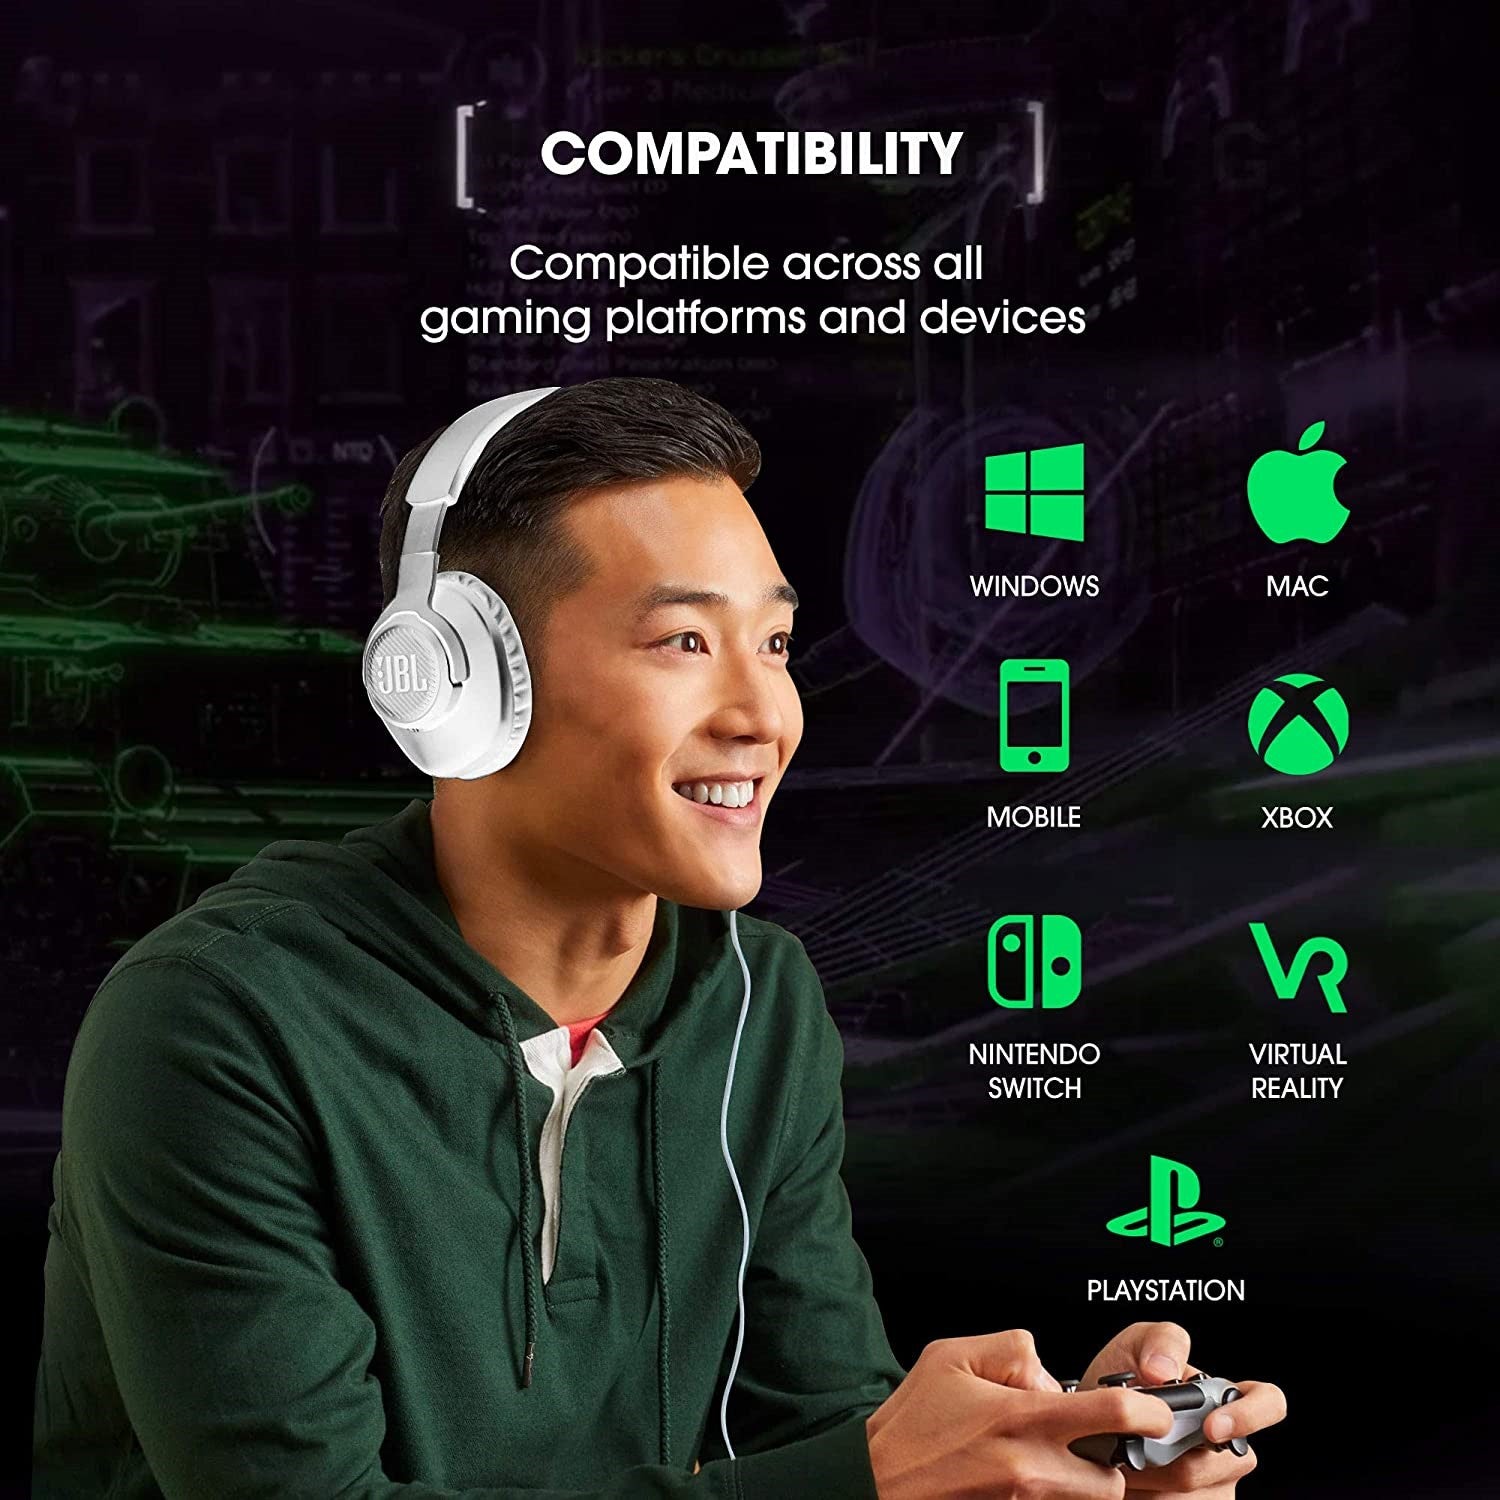 JBL Quantum 100 Wired Over-Ear Gaming Headset With Flip-Up Mic